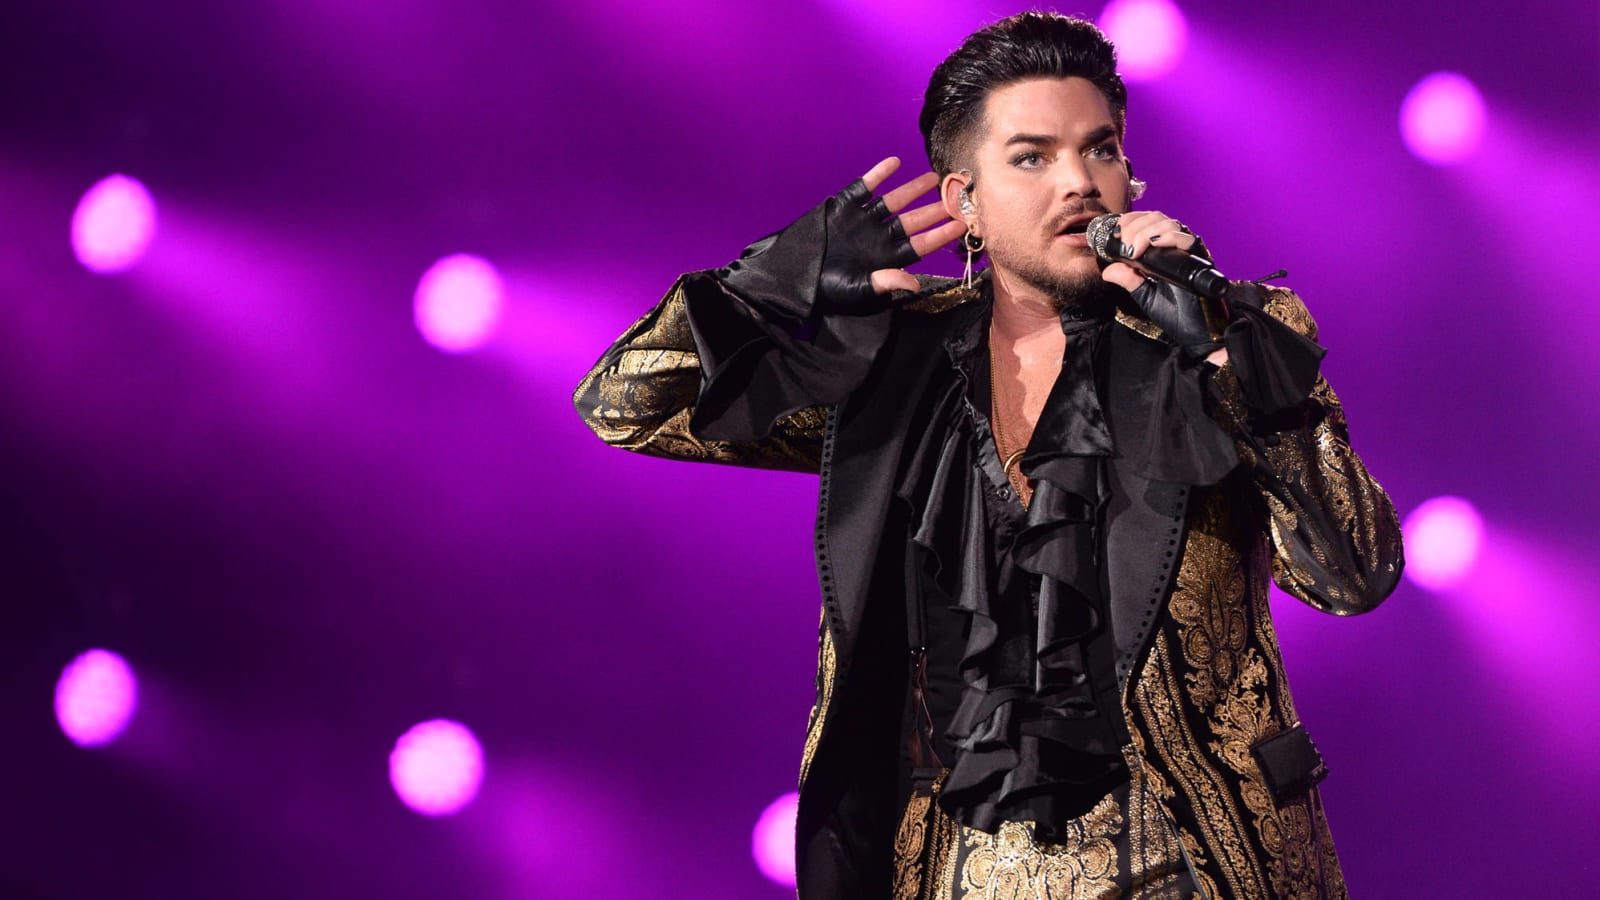 Adam Lambert dishes on auditioning for 'A Star is Born'